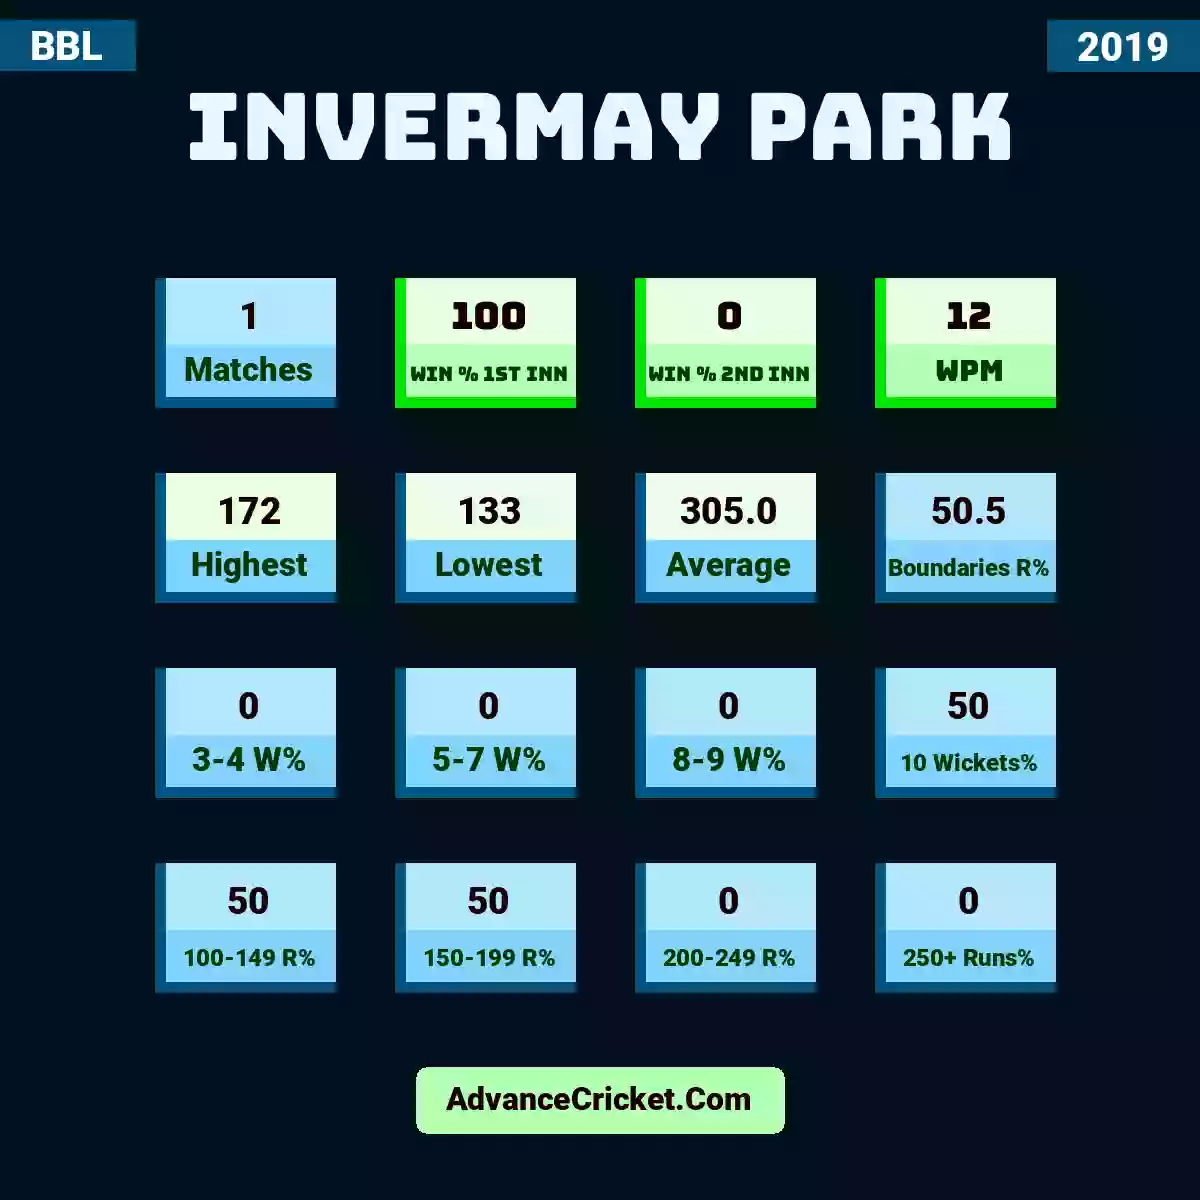 Image showing Invermay Park with Matches: 1, Win % 1st Inn: 100, Win % 2nd Inn: 0, WPM: 12, Highest: 172, Lowest: 133, Average: 305.0, Boundaries R%: 50.5, 3-4 W%: 0, 5-7 W%: 0, 8-9 W%: 0, 10 Wickets%: 50, 100-149 R%: 50, 150-199 R%: 50, 200-249 R%: 0, 250+ Runs%: 0.